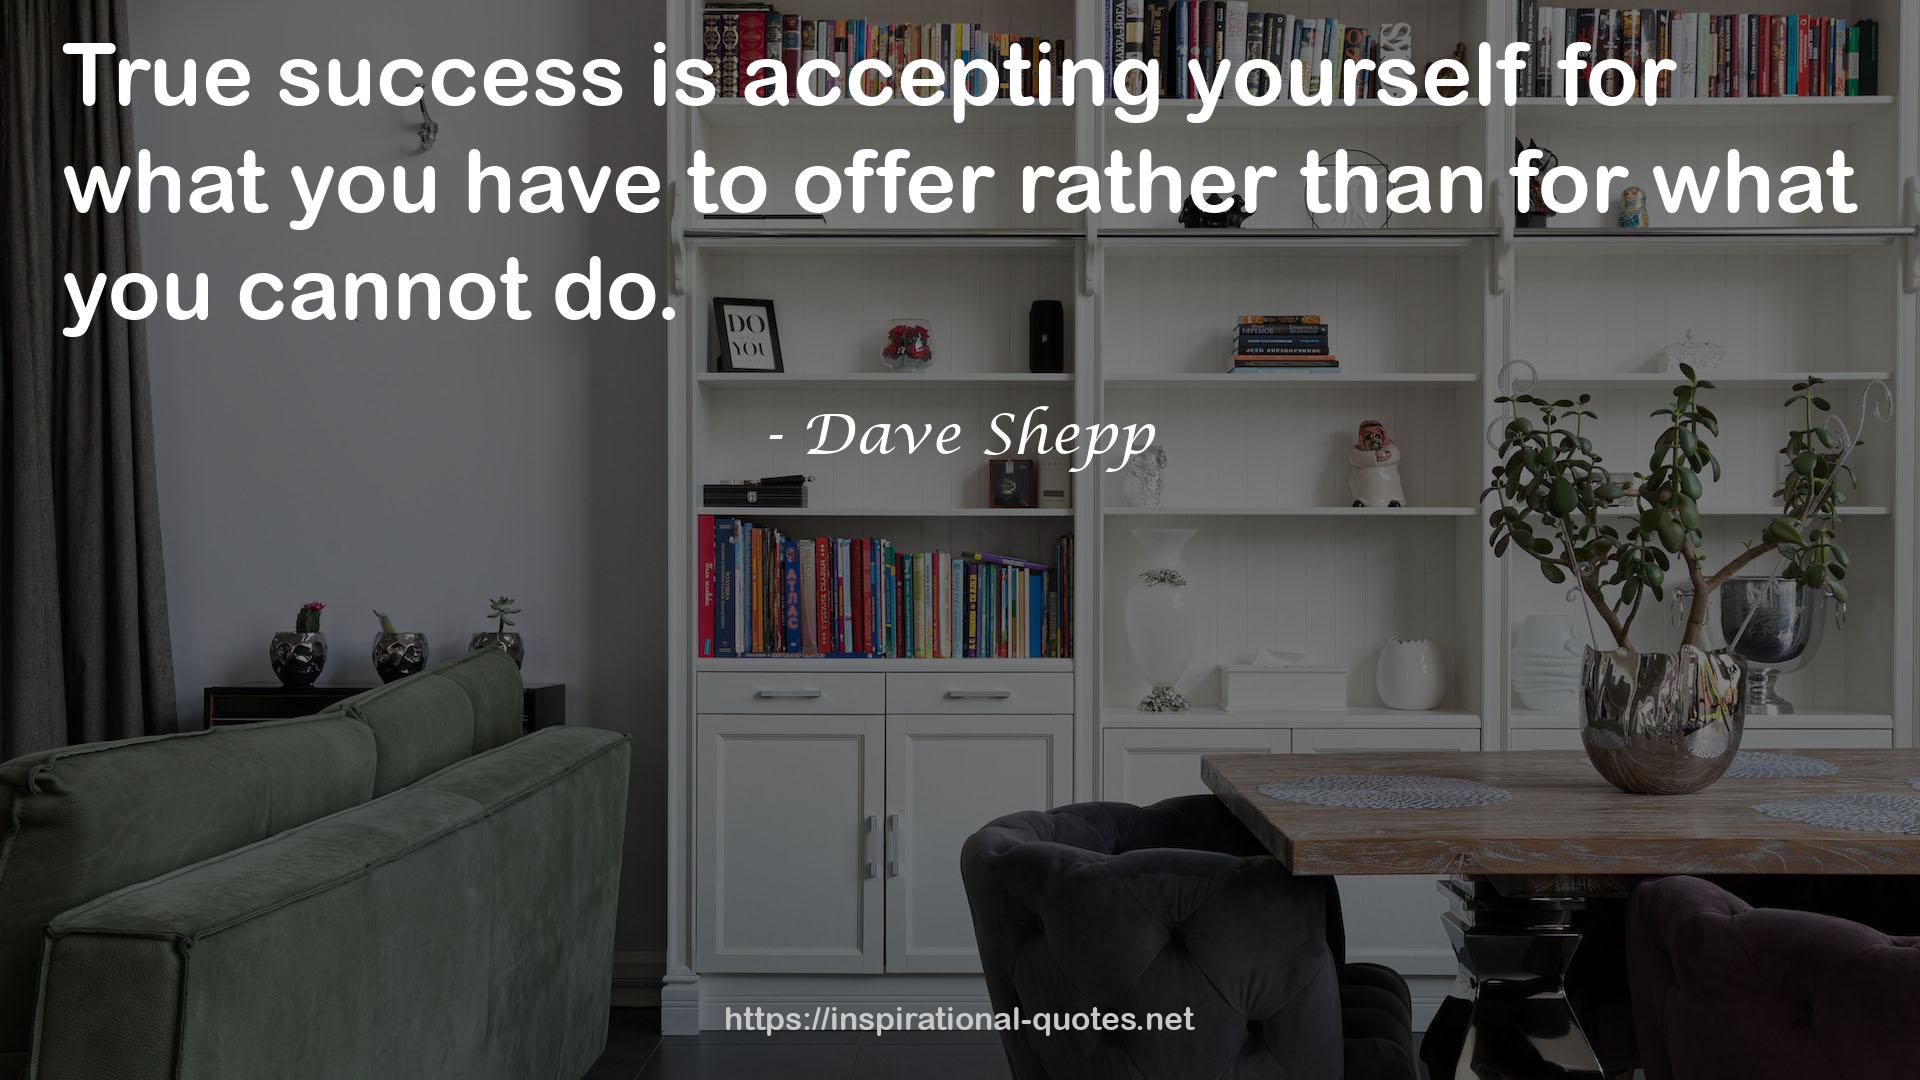 Dave Shepp QUOTES